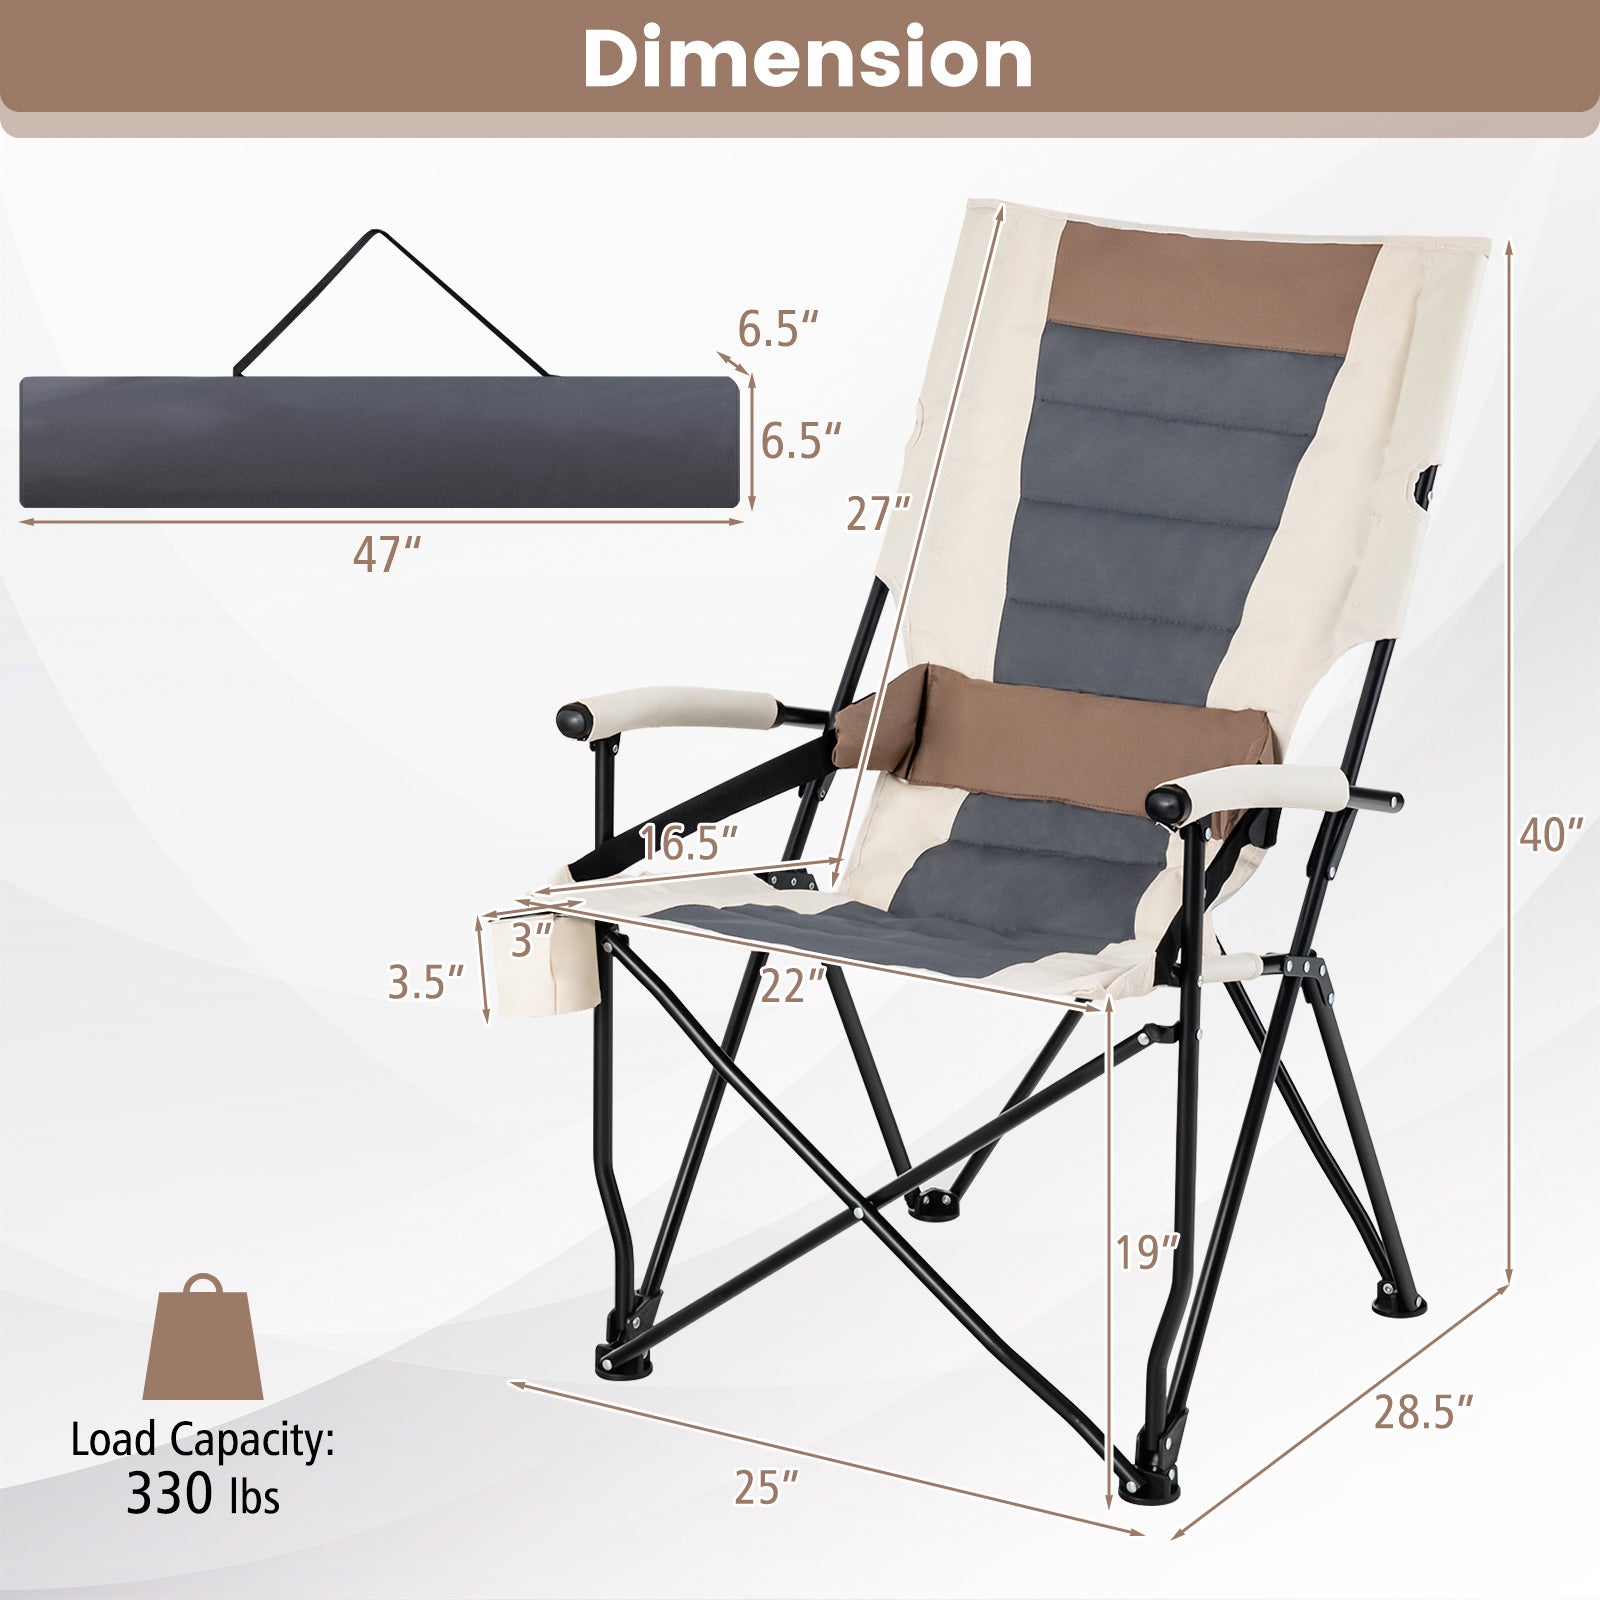 Foldable and Adjustable Camping Chair with Cup Holder for Outdoor Fishing